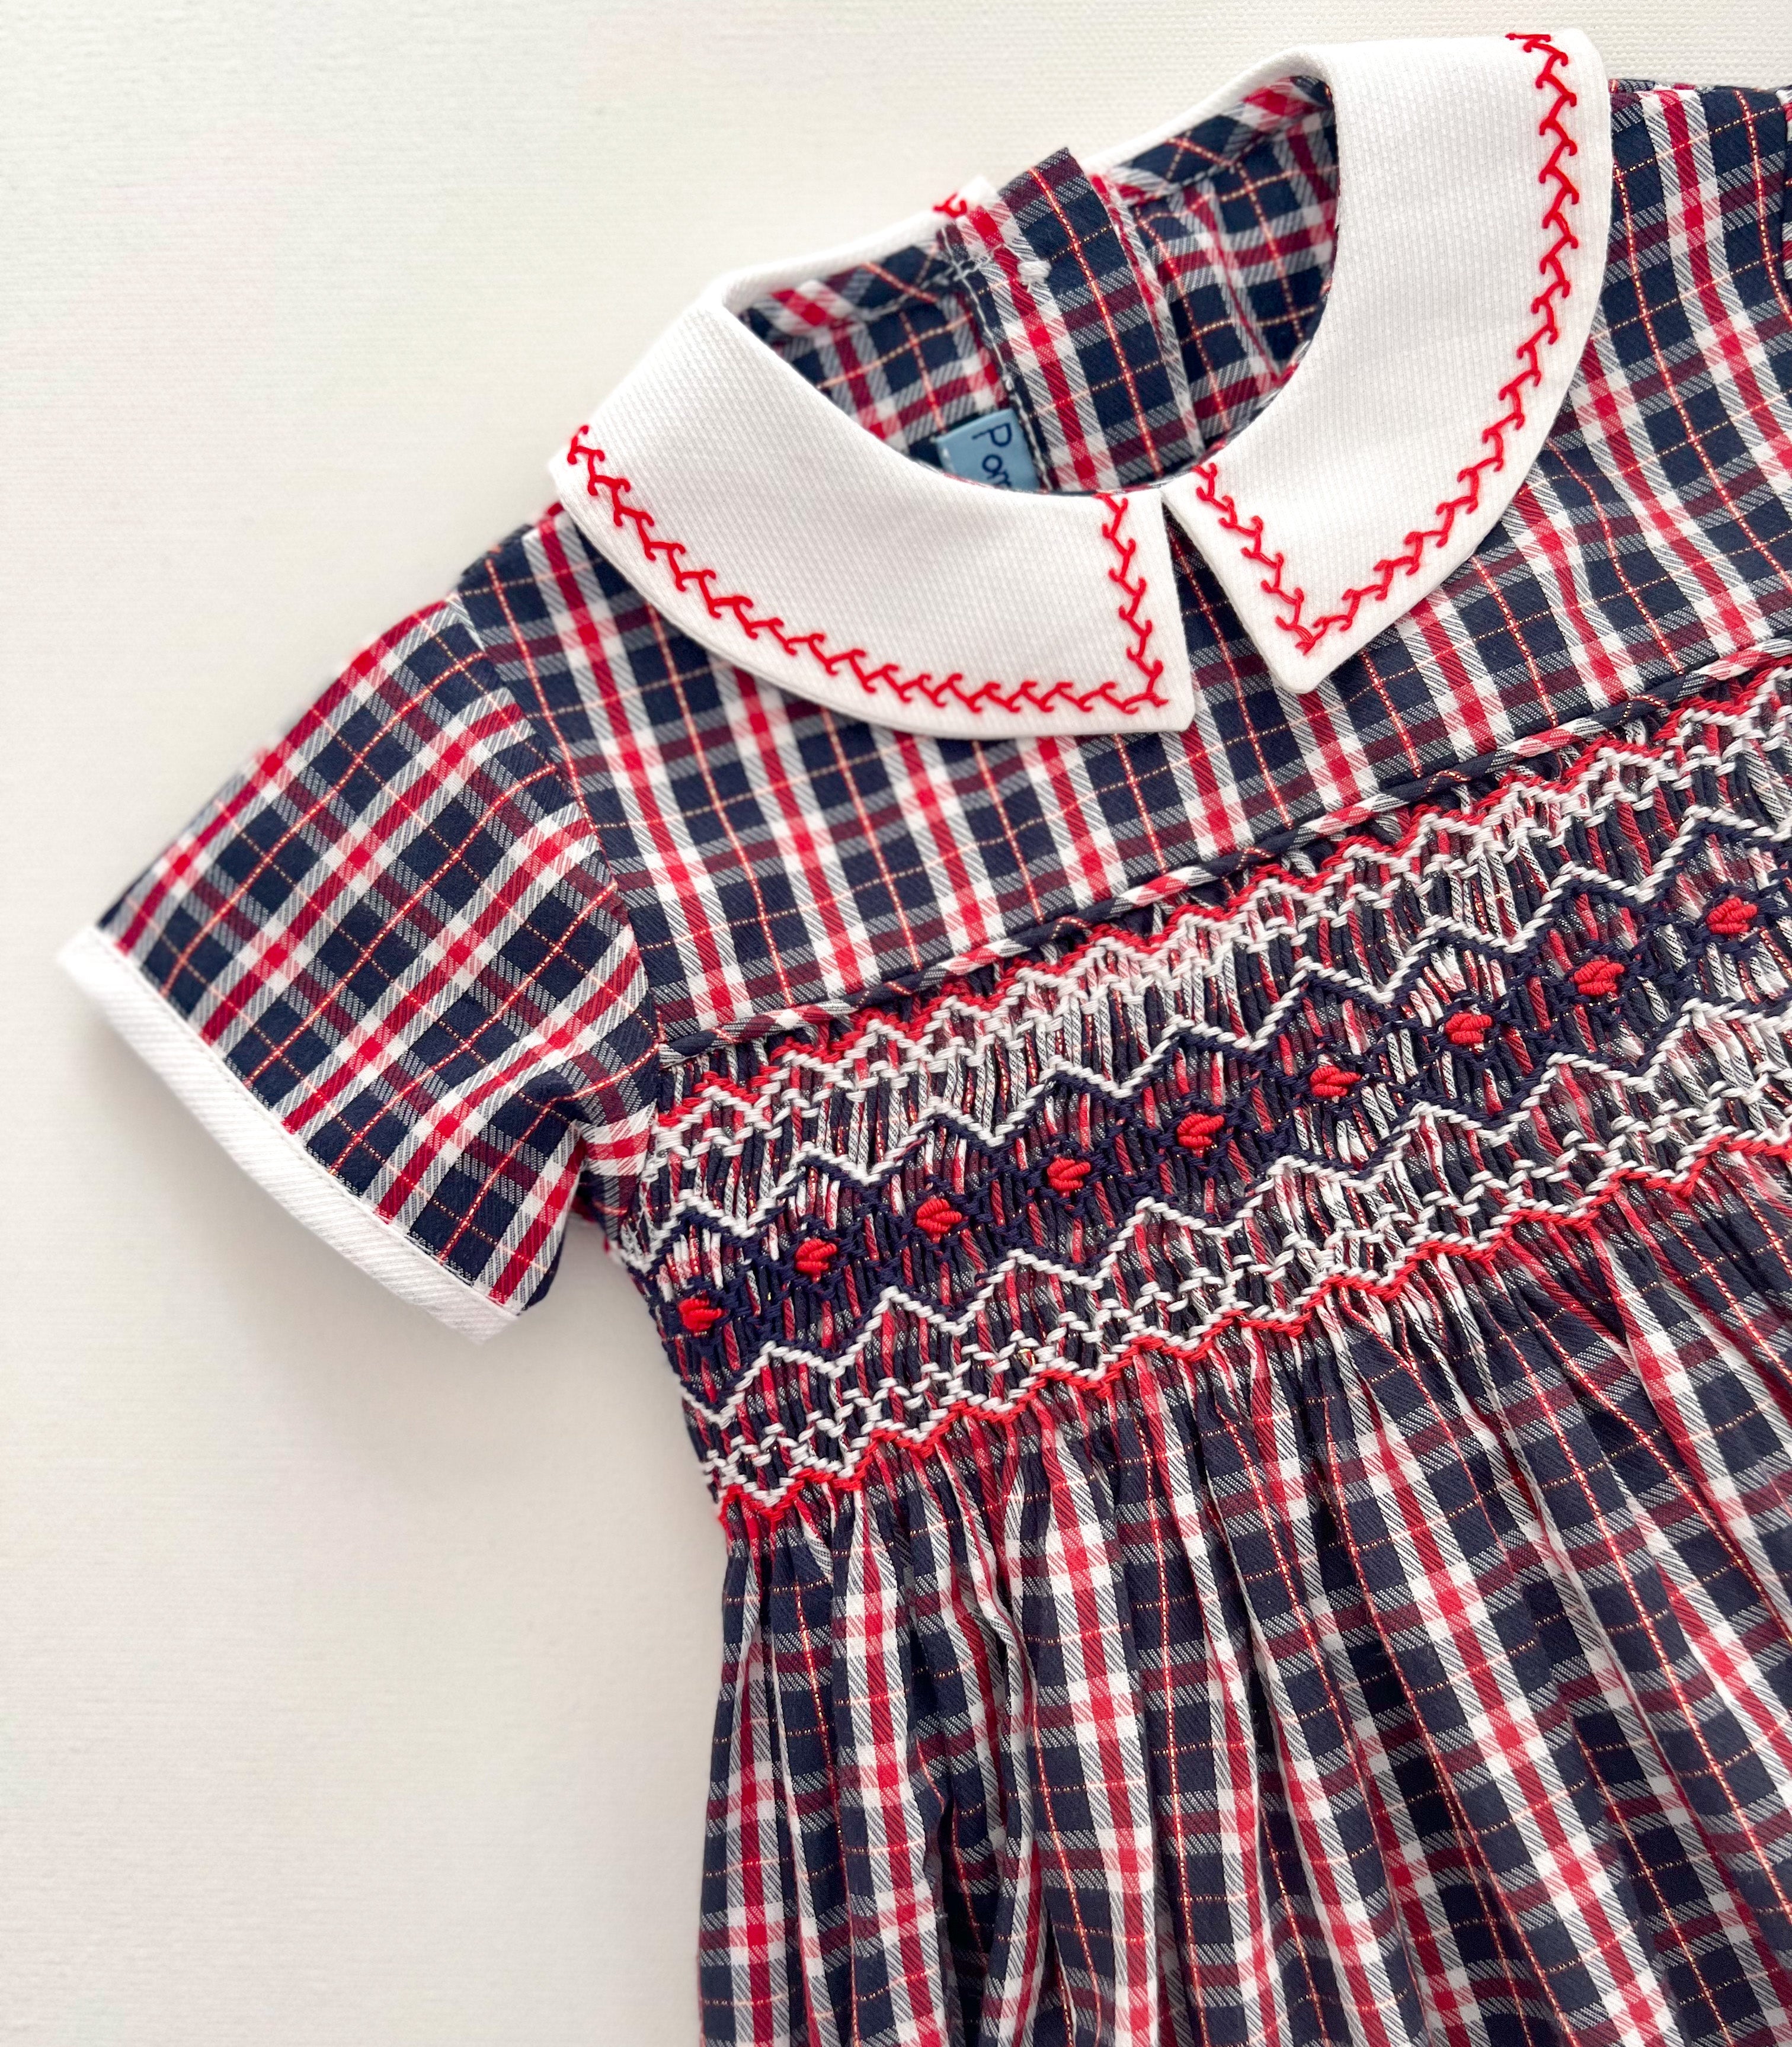 ** SECONDS SALE ** The hand smocked unisex ANDRÉA romper - Tartan blue/red